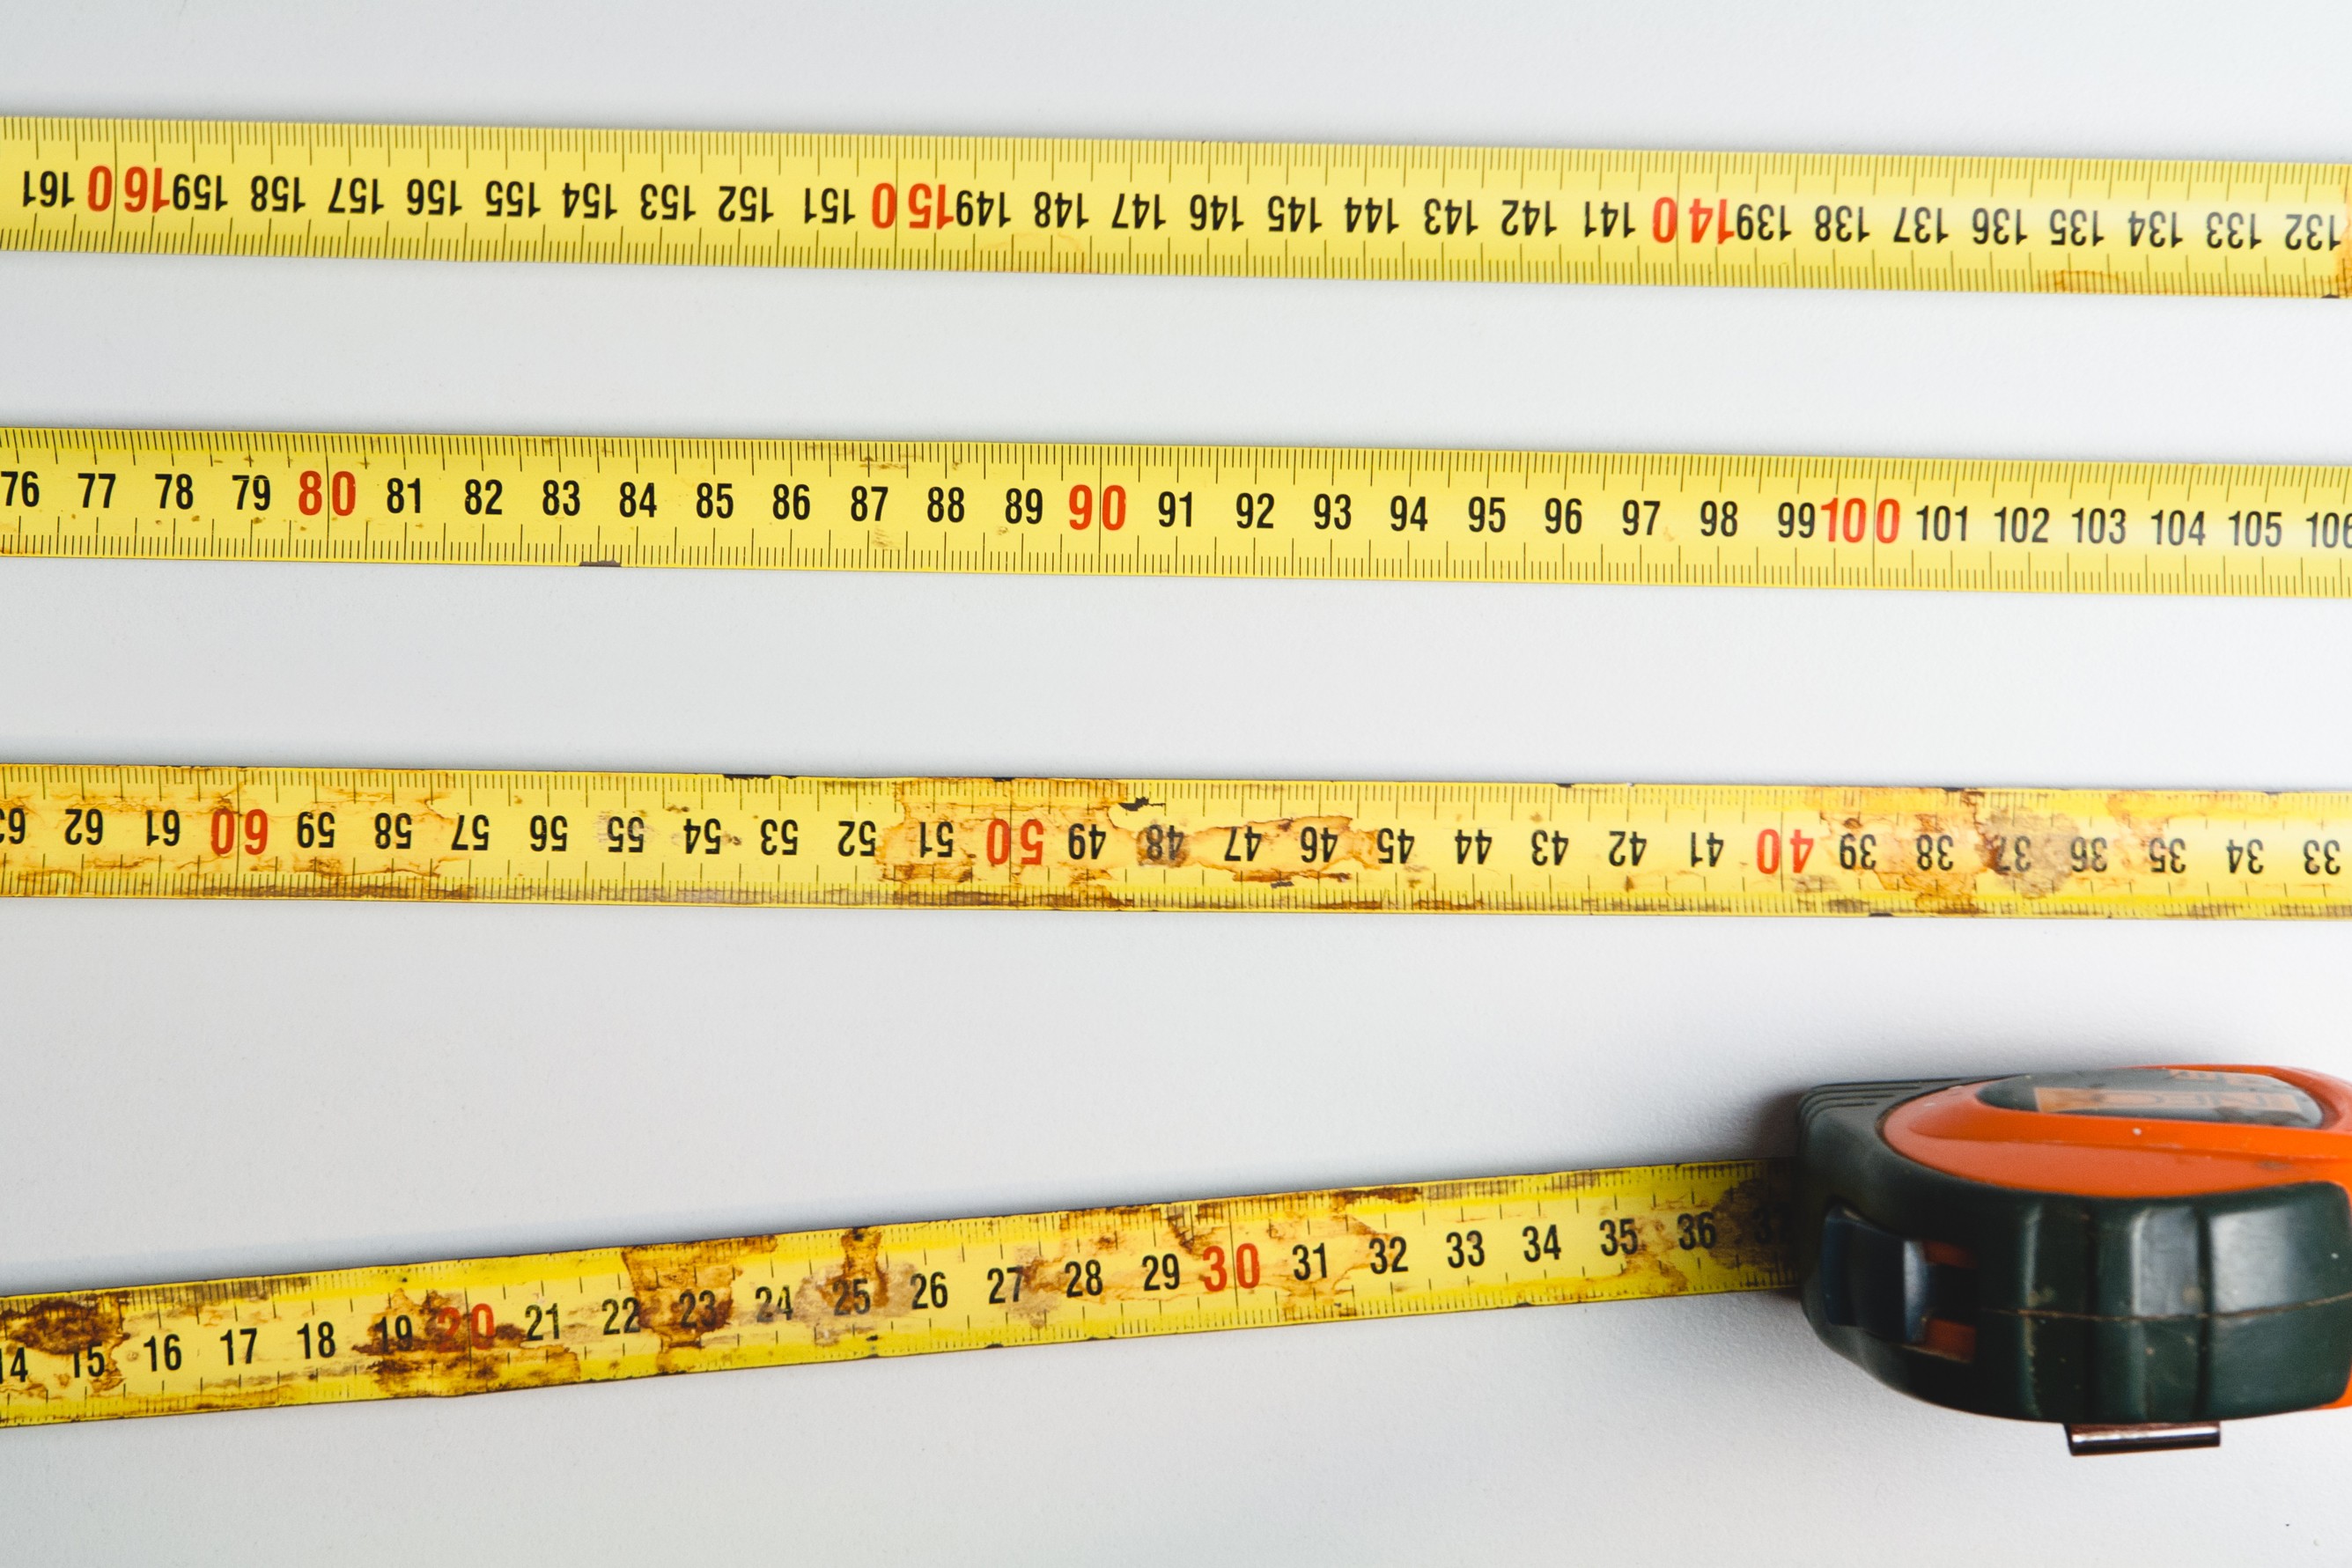 General 2671x1781 measuring tape rust white background numbers